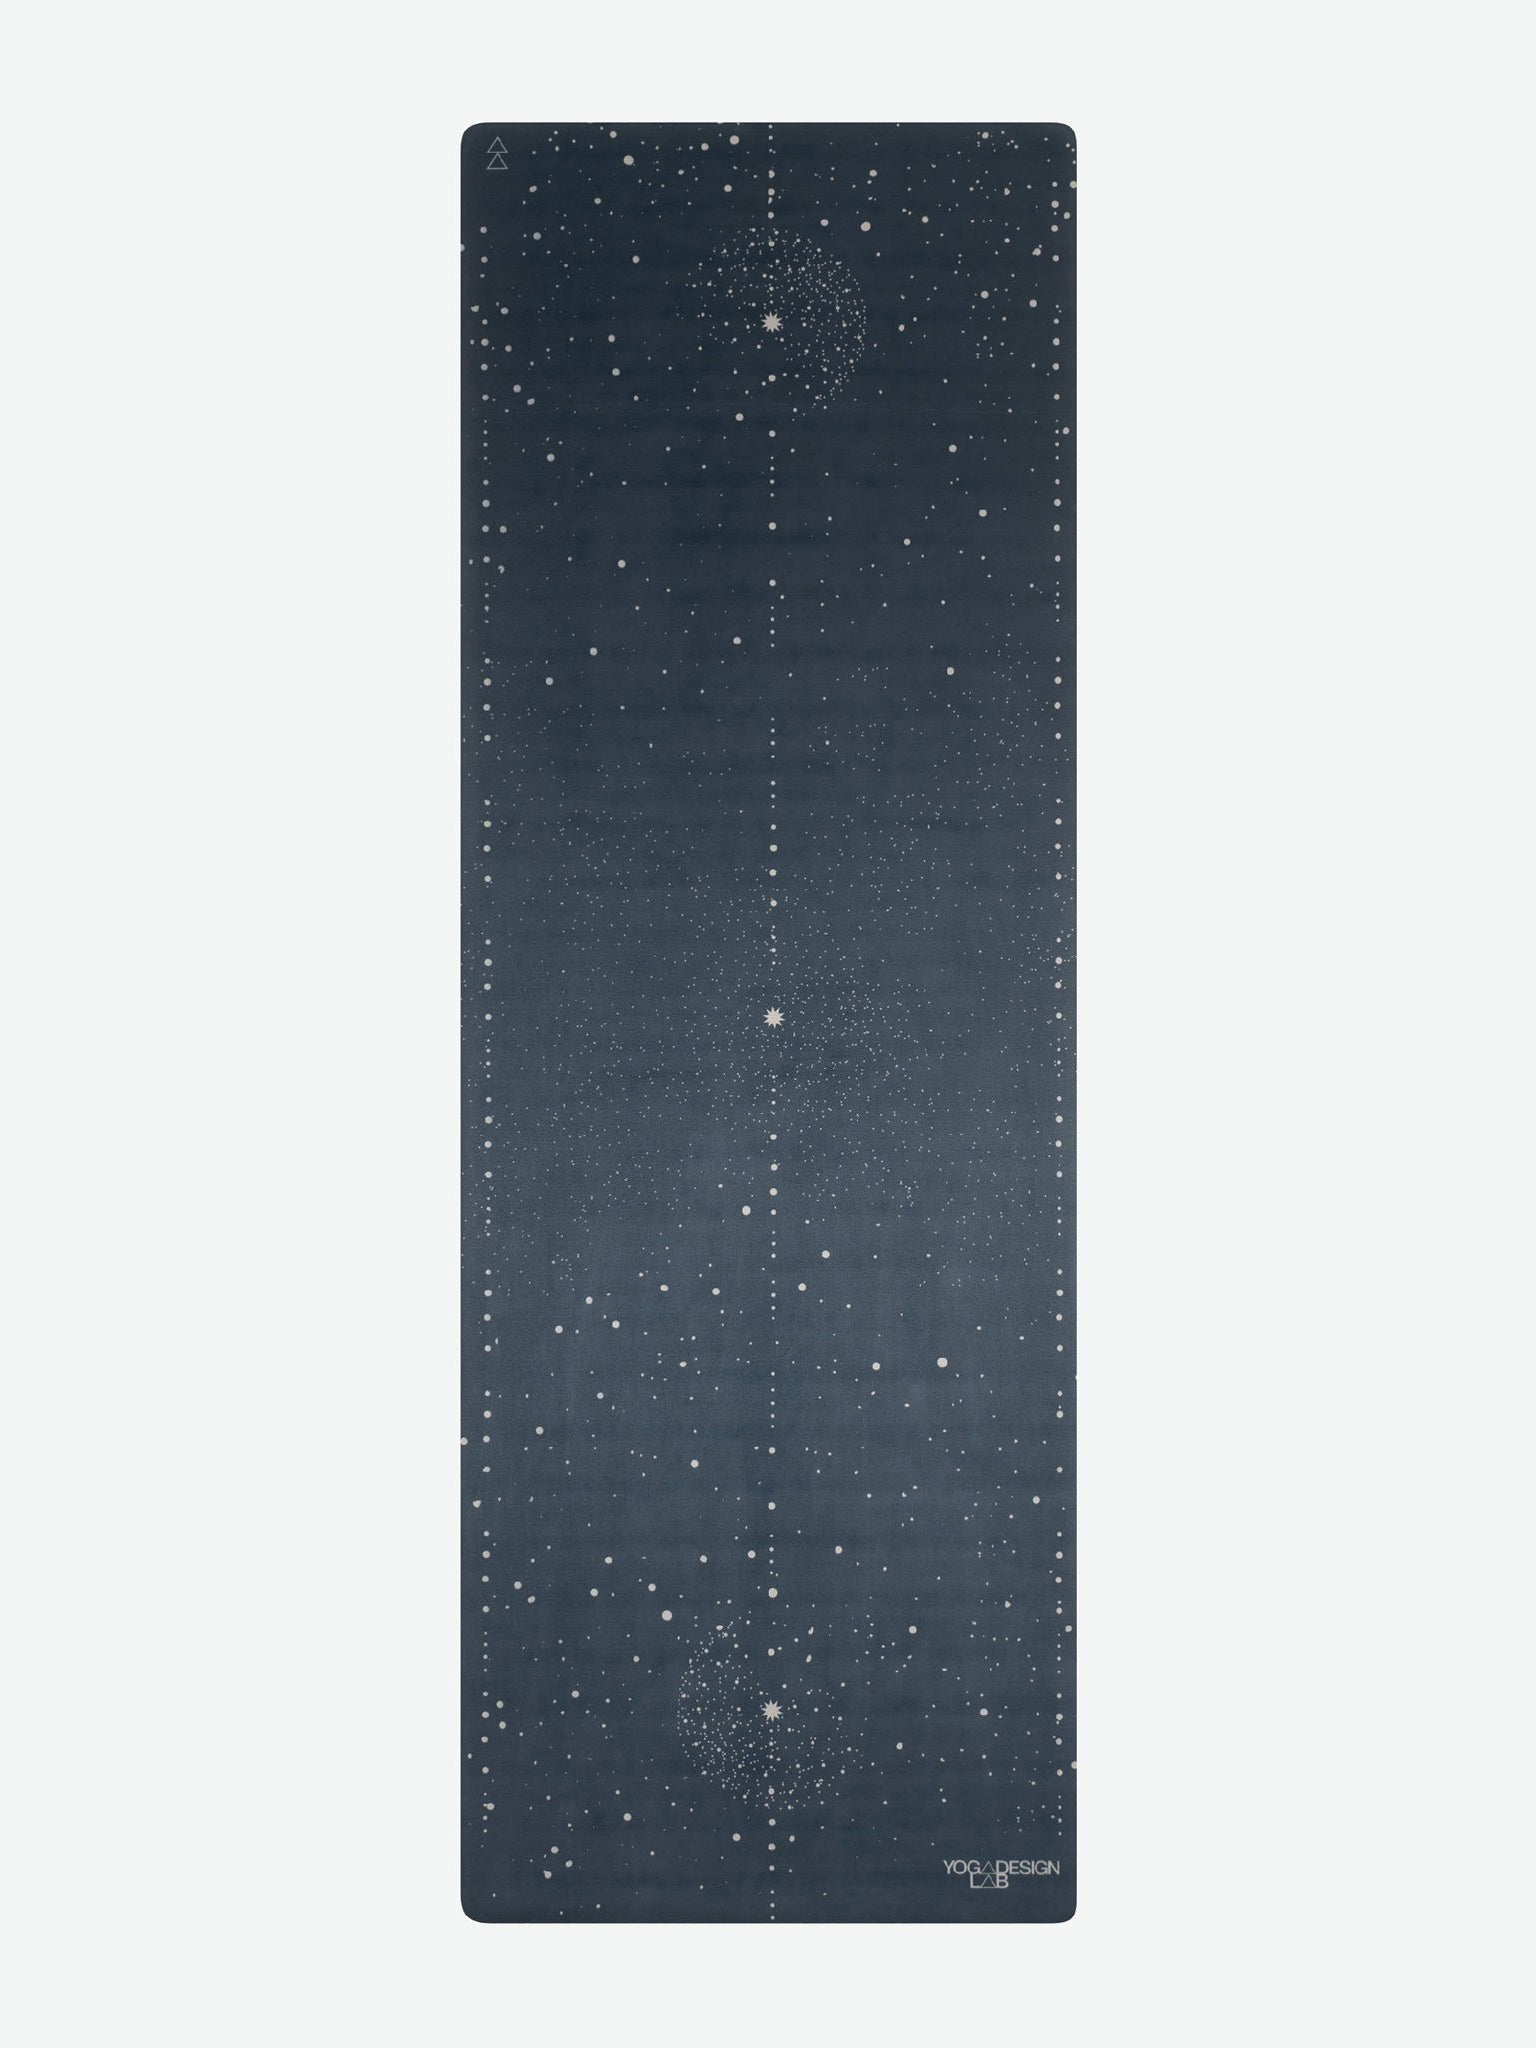 Navy blue yoga mat with cosmic pattern from Yoga Design Lab, non-slip surface, eco-friendly material, front view.